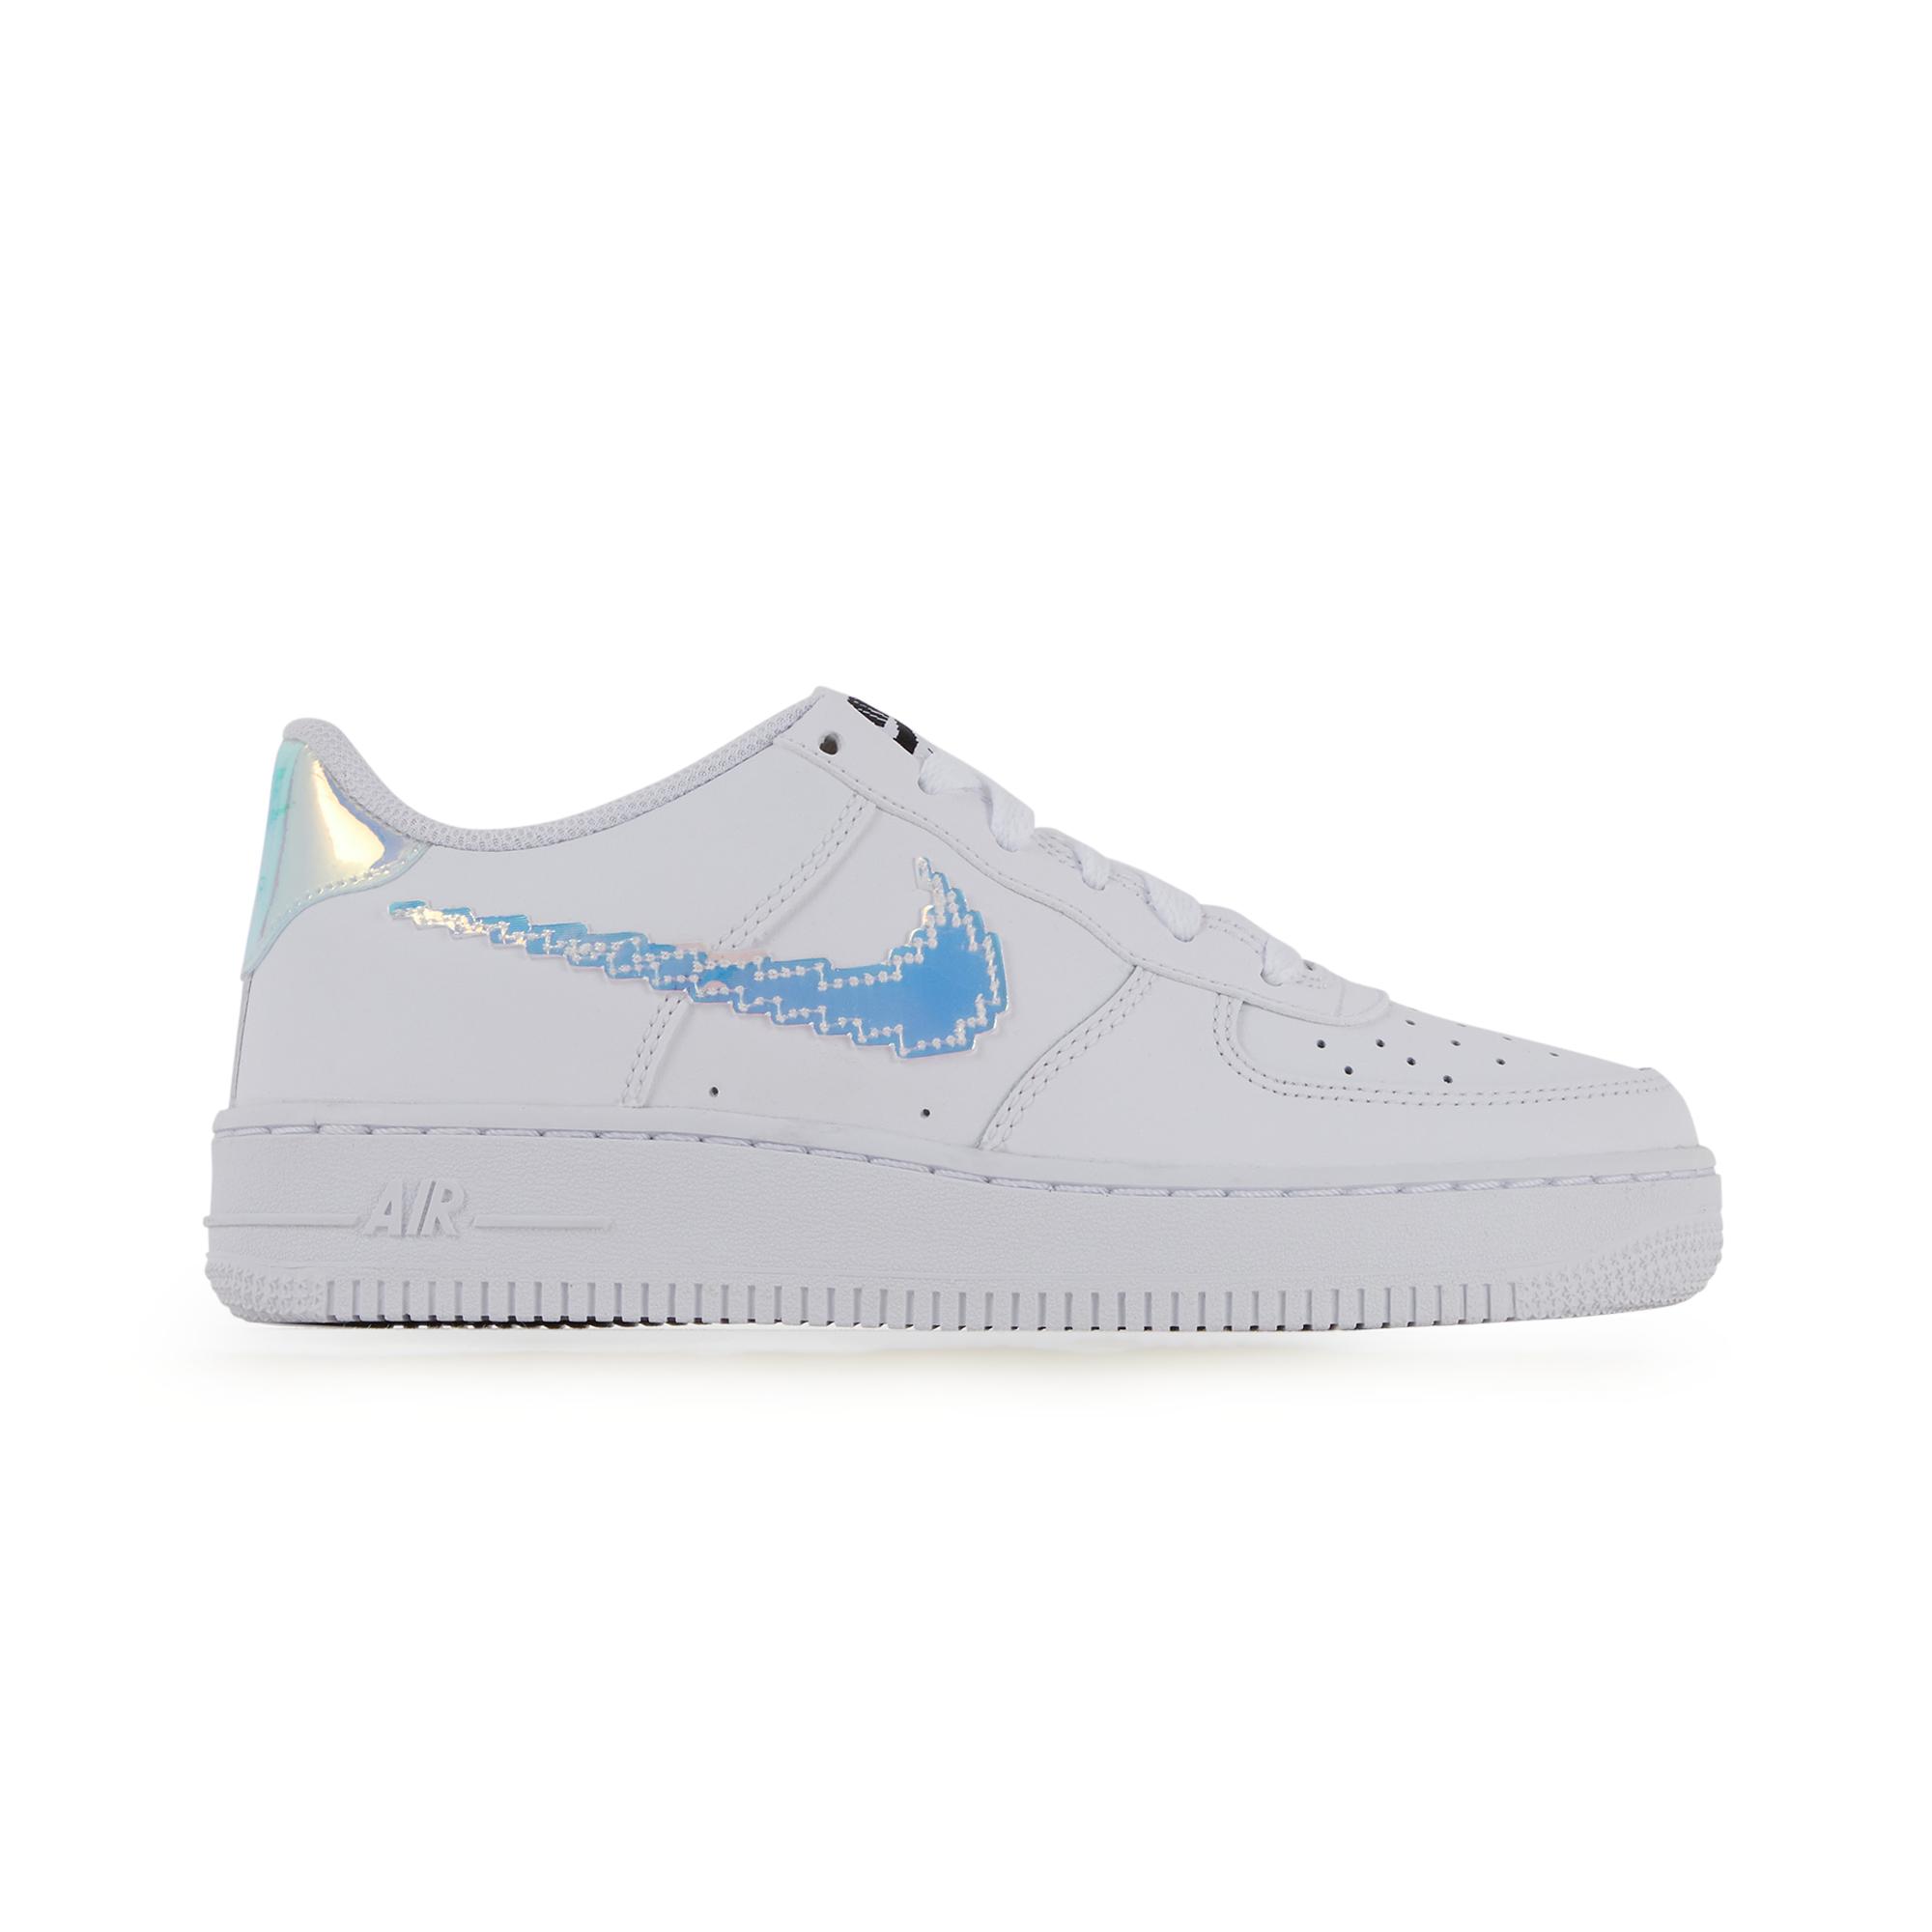 Air force 1 low plugged in Nike - Lyst